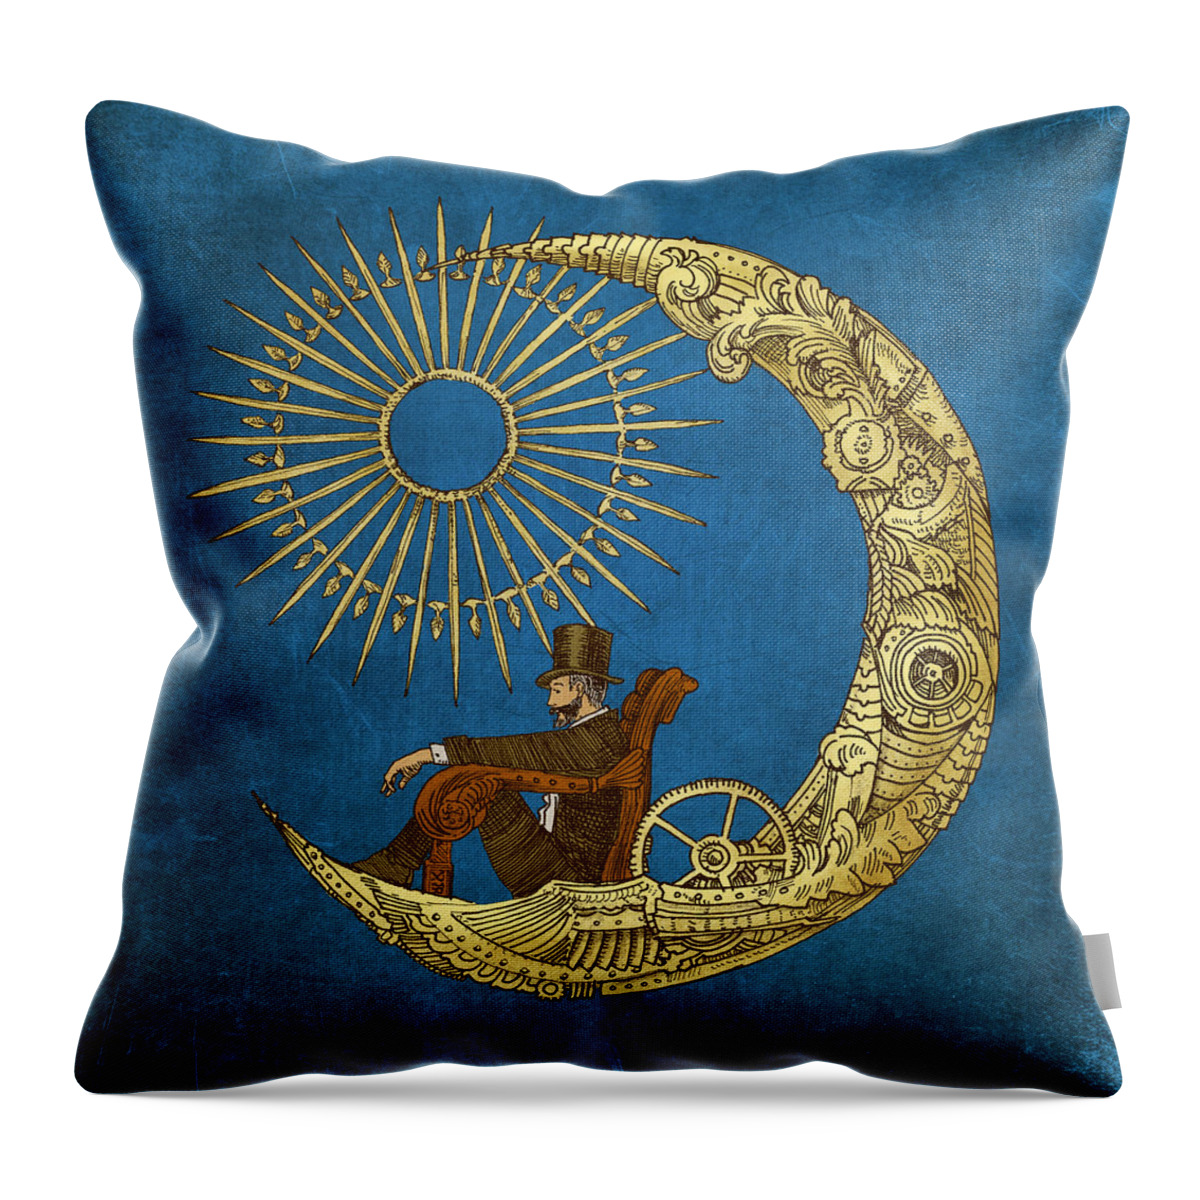 Blue Throw Pillow featuring the digital art Moon Travel by Eric Fan